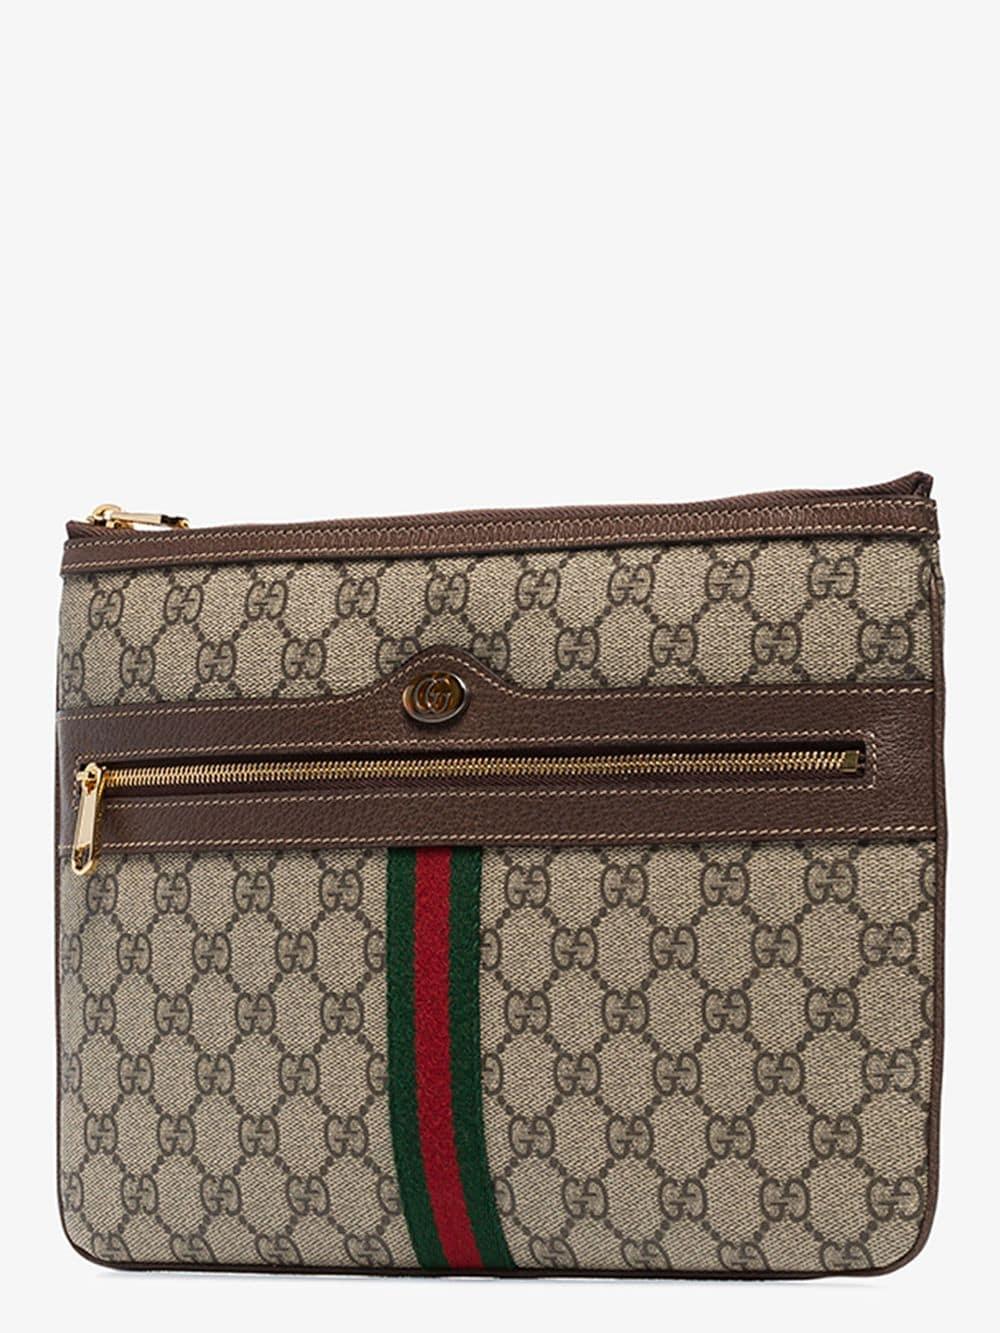 Gucci Synthetic Ophidia GG Supreme Tablet Clutch in Brown - Lyst